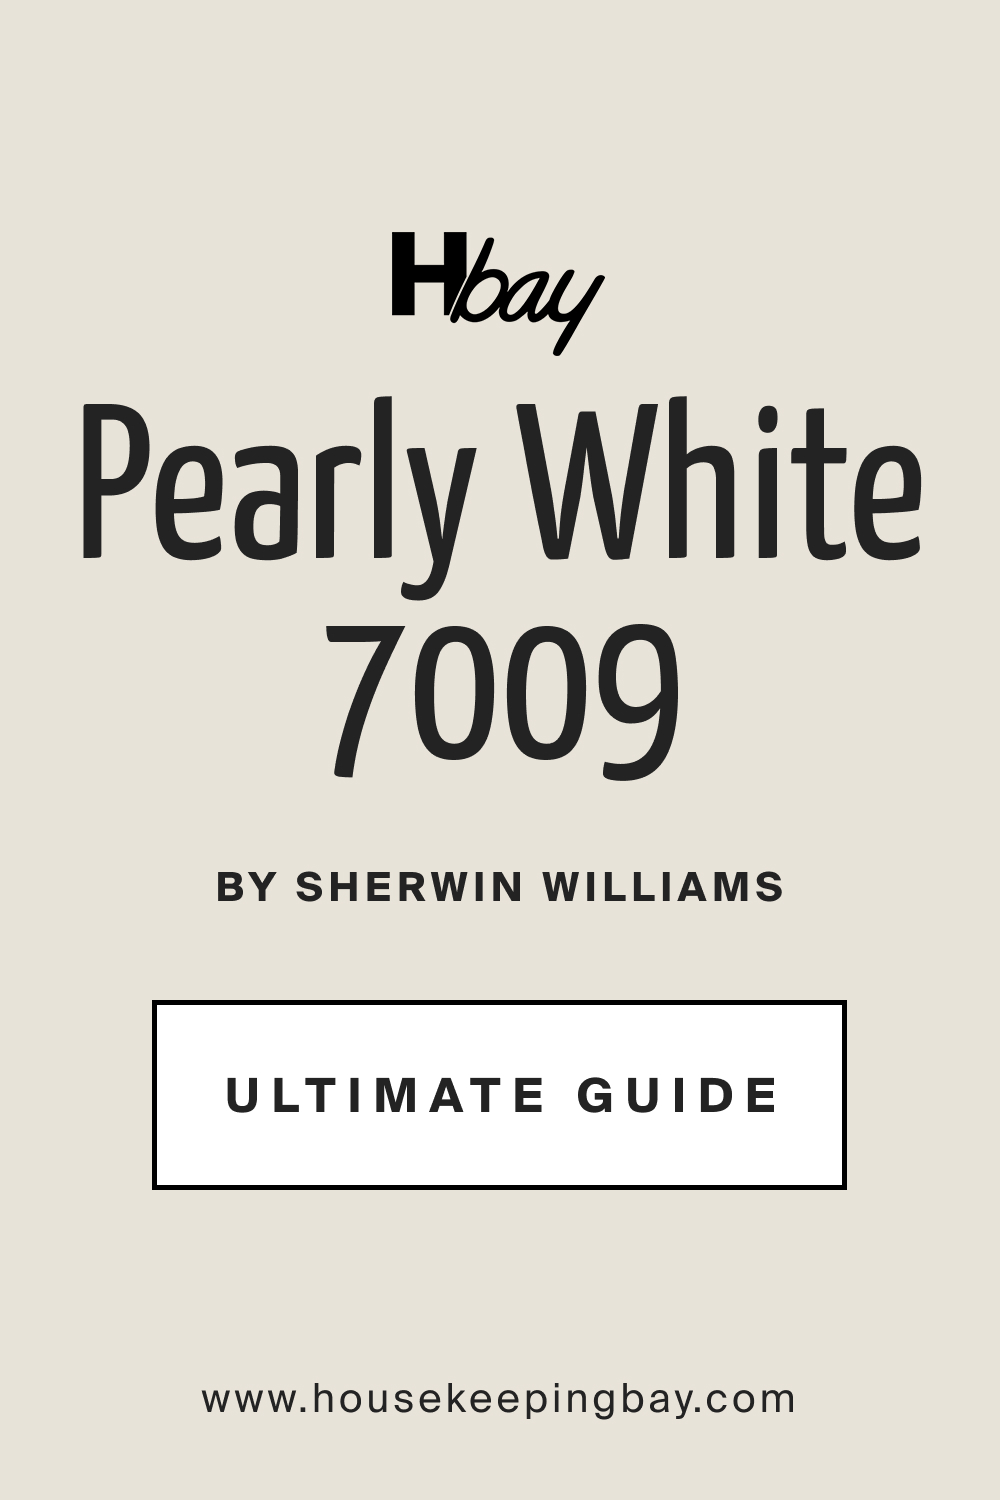 Pearly White SW 7009 by Sherwin Williams Ultimate Guide